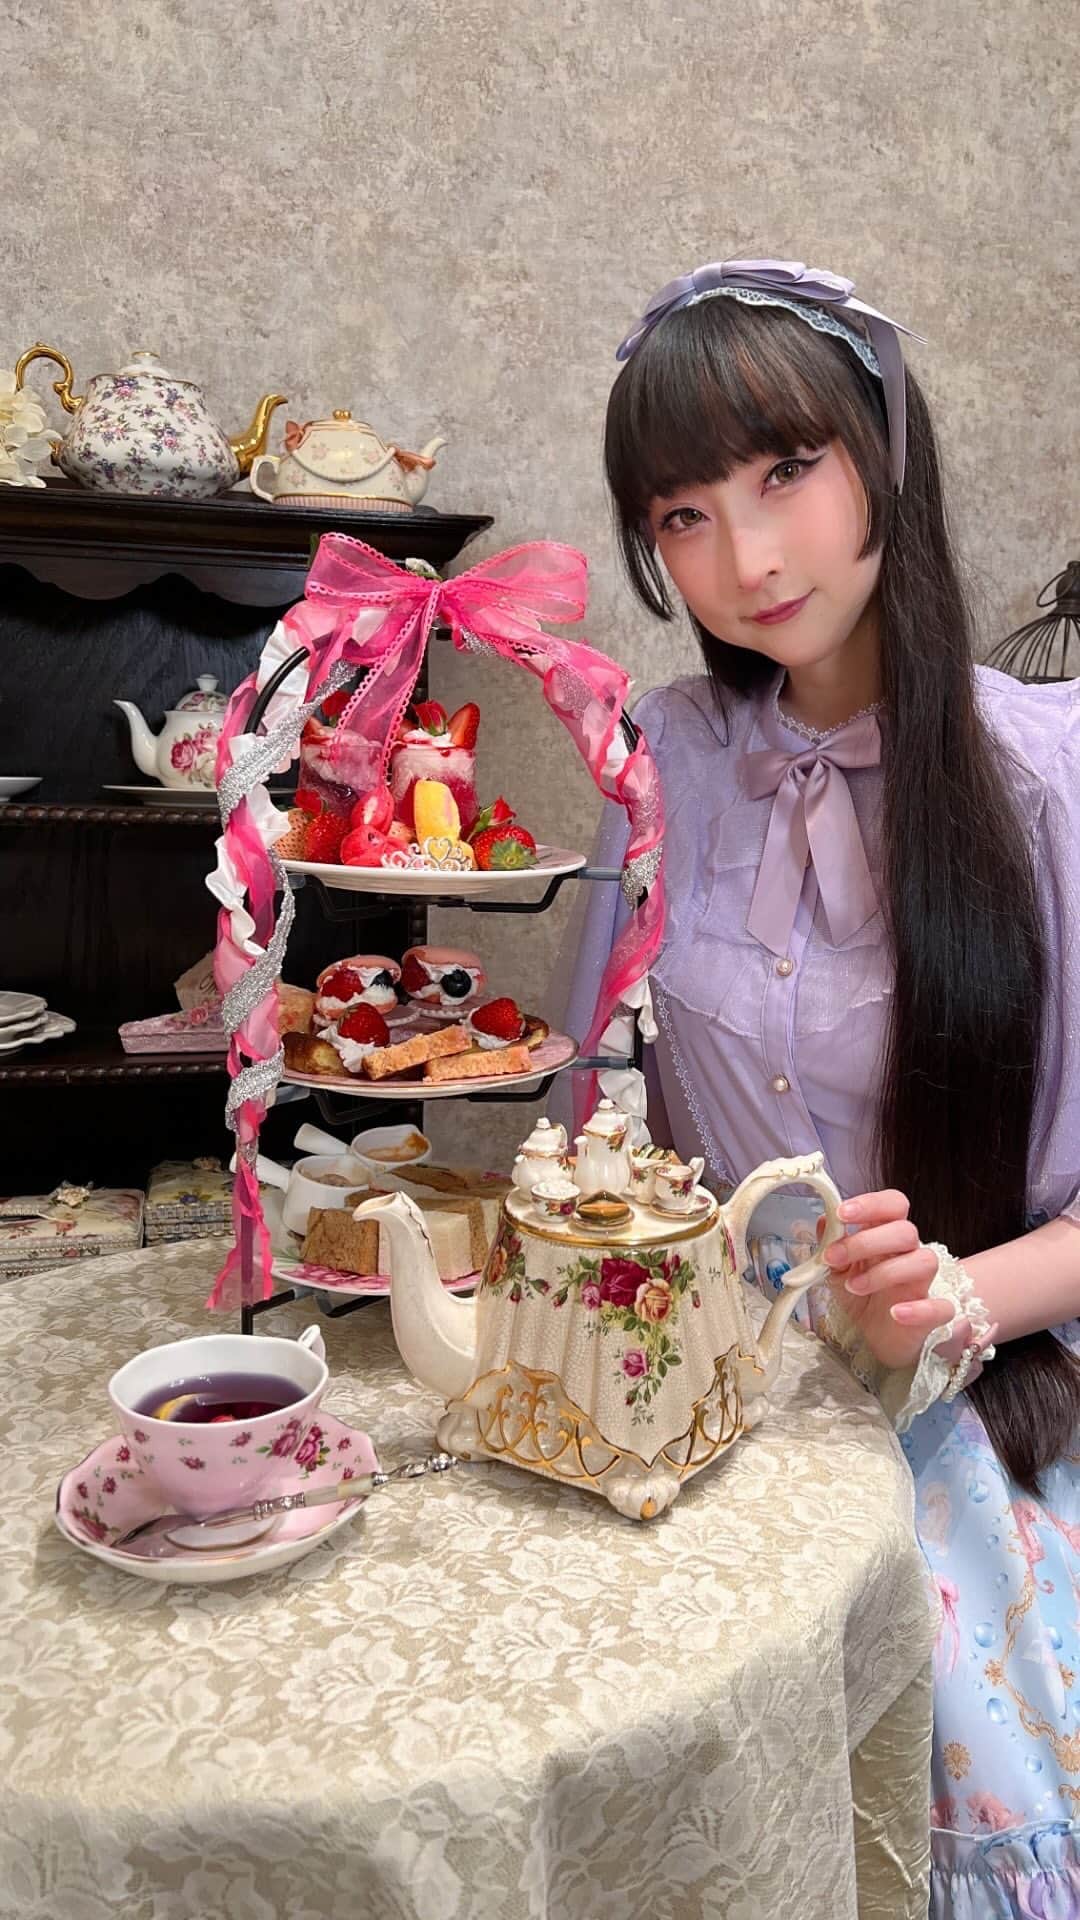 RinRinのインスタグラム：「Thank you guys for joining us in celebrating @axes_femme_kawaii_official ‘s international website opening!  Todays afternoon tea is provided by @cafe_acorite 🍓🌸 thank you so much!   🌟[Special Campaign]🌟 We’ll be giving away presents to 3 randomly selected winners! To qualify, please give a comment with hashtag below! 🎀 #rinrinaxeskawaii 🎀 Accepting comments until May 8th, 2022 11:59pm JST (May 8th, 2022 7:59AM PDT/10:59AM EDT)  🌟Coupon Code 🌟 (Code is displayed in video) Can be used until April 30, 2022 JST (April 30 7:59AM PDT/10:59AM EDT)  #rinrindoll #japan #tokyo #harajuku #japanesefashion #tokyofashion #harajukufashion #東京 #コーデ #今日のコーデ #原宿 #ootd #lolitafashion #egl #classiclolita #sweetlolita #lolitateaparty #lolitatalkshow #axesfemme #axesfemmekawaii #axesfemmelive #アクシーズ生放送 #アクシーズファム #ロリィタ　#ロリータ #甘ロリ #お茶会 #cafeacorite #アフターヌーンティー」